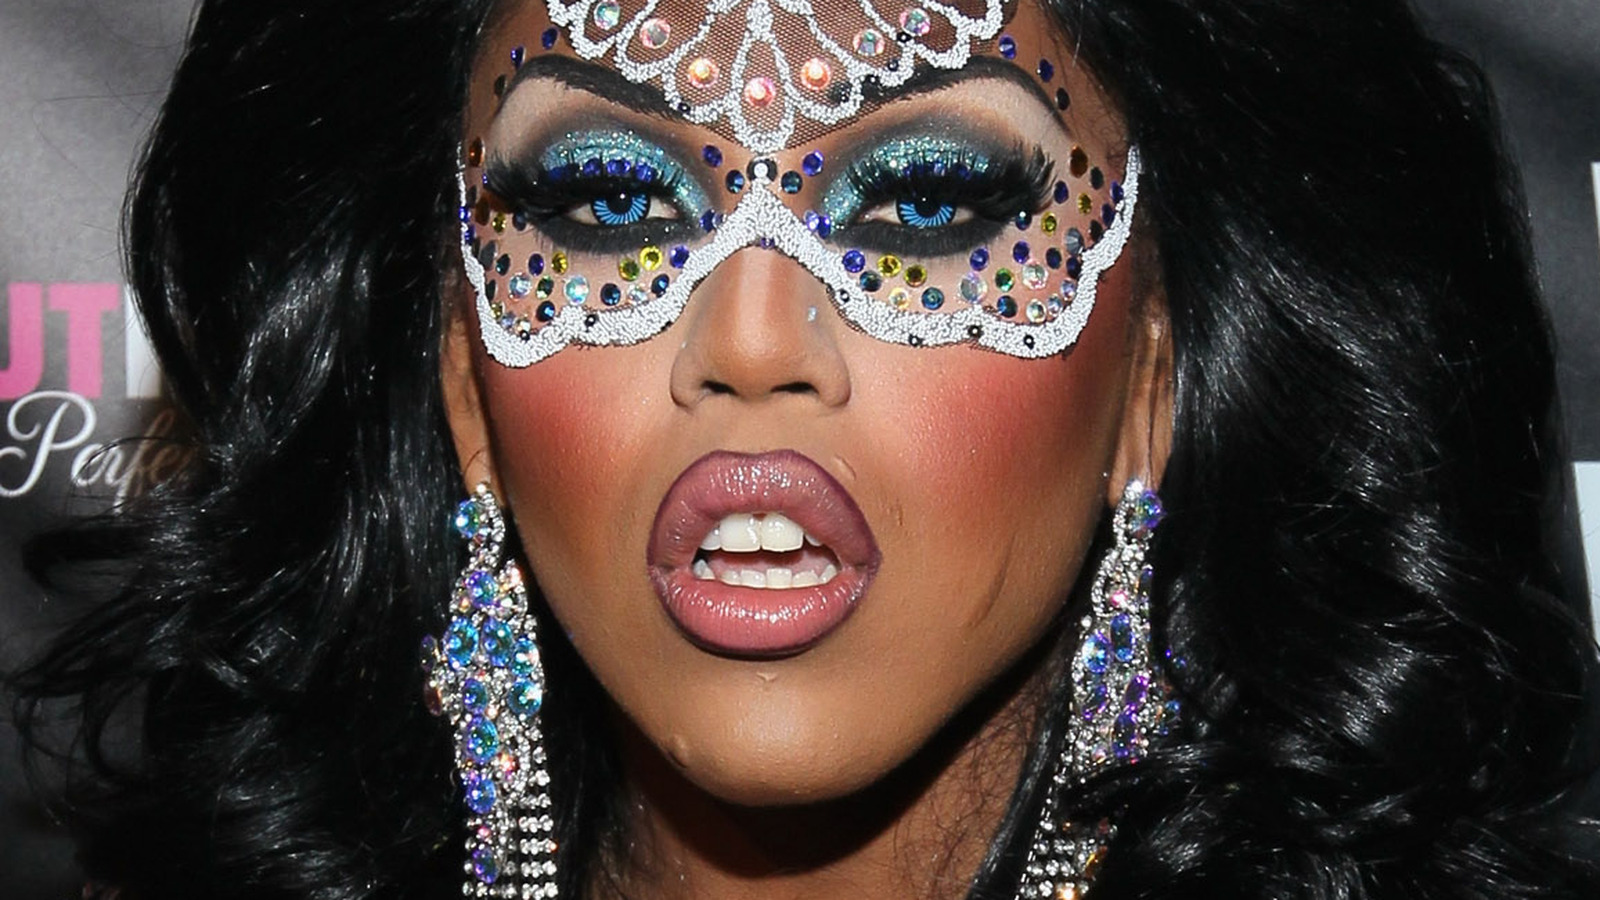 What Happened To Kenya Michaels After RuPaul's Drag Race?